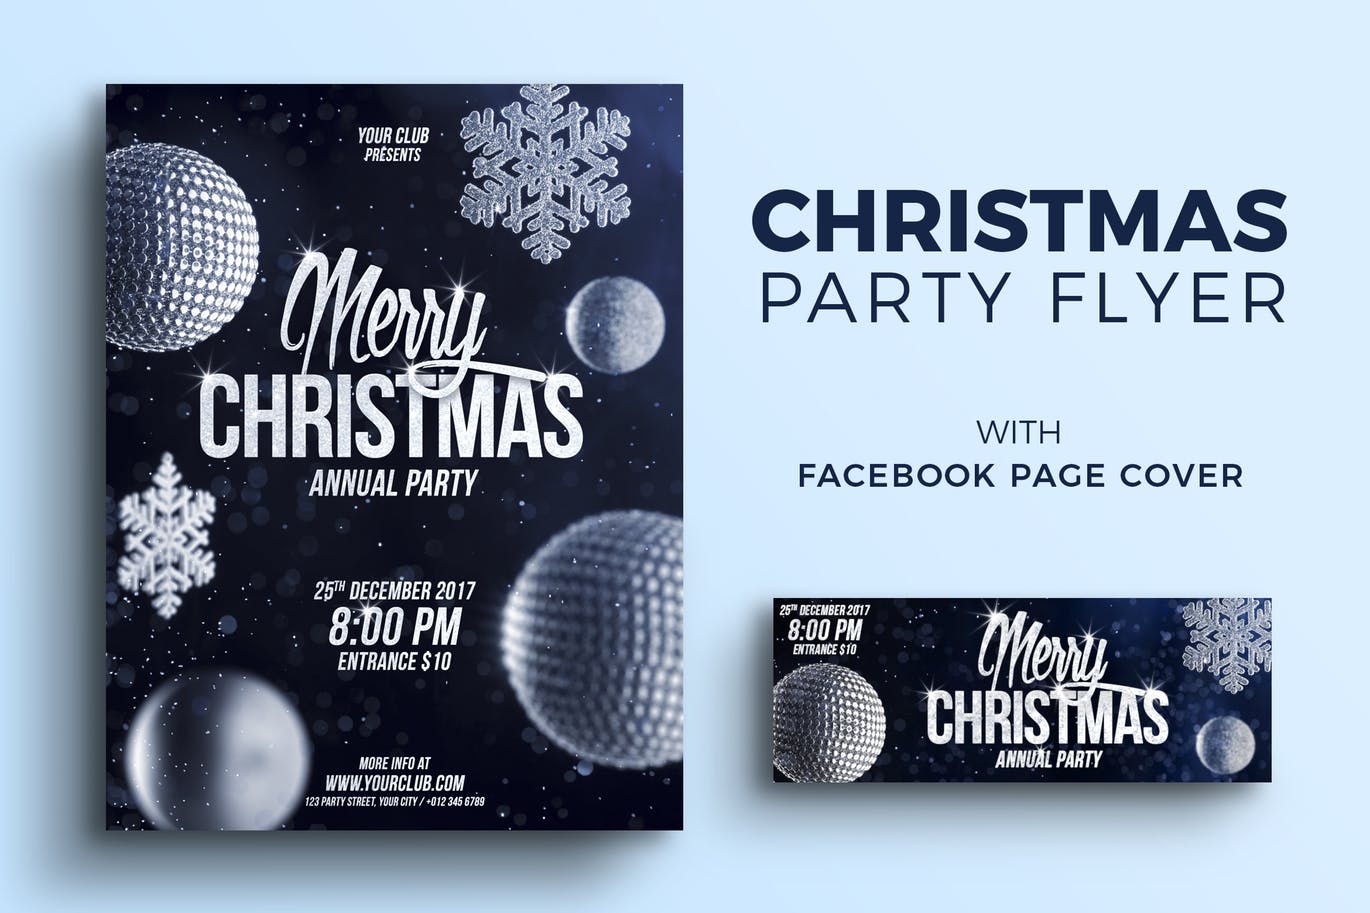 Christmas flyer and facebook cover